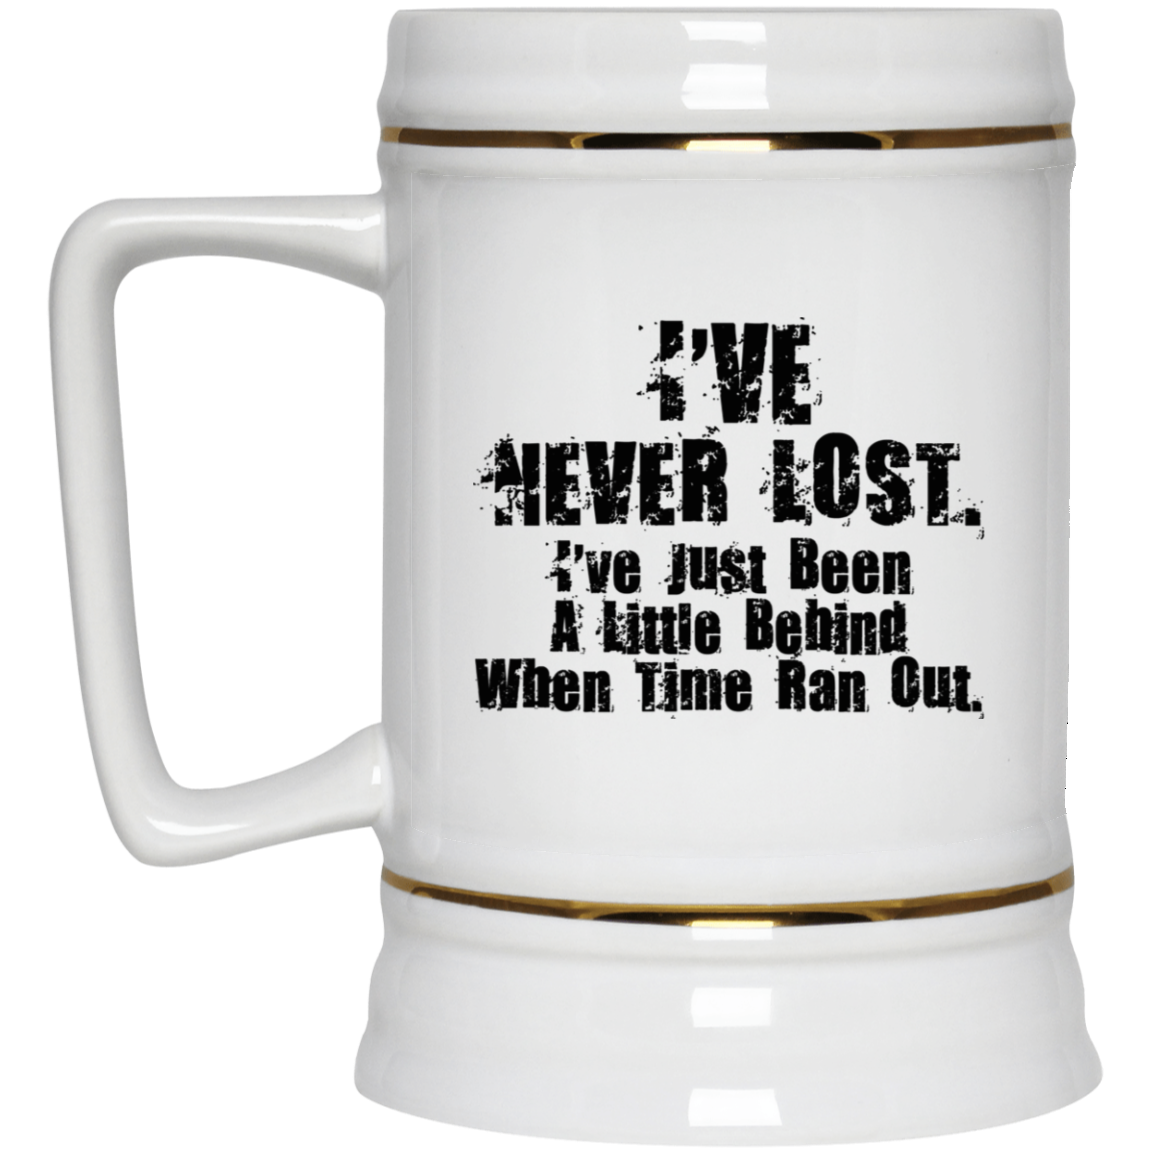 Details about   Coffee Cup Mug Travel 11 15 I Am Danielle Let's Just Assume Never Wrong